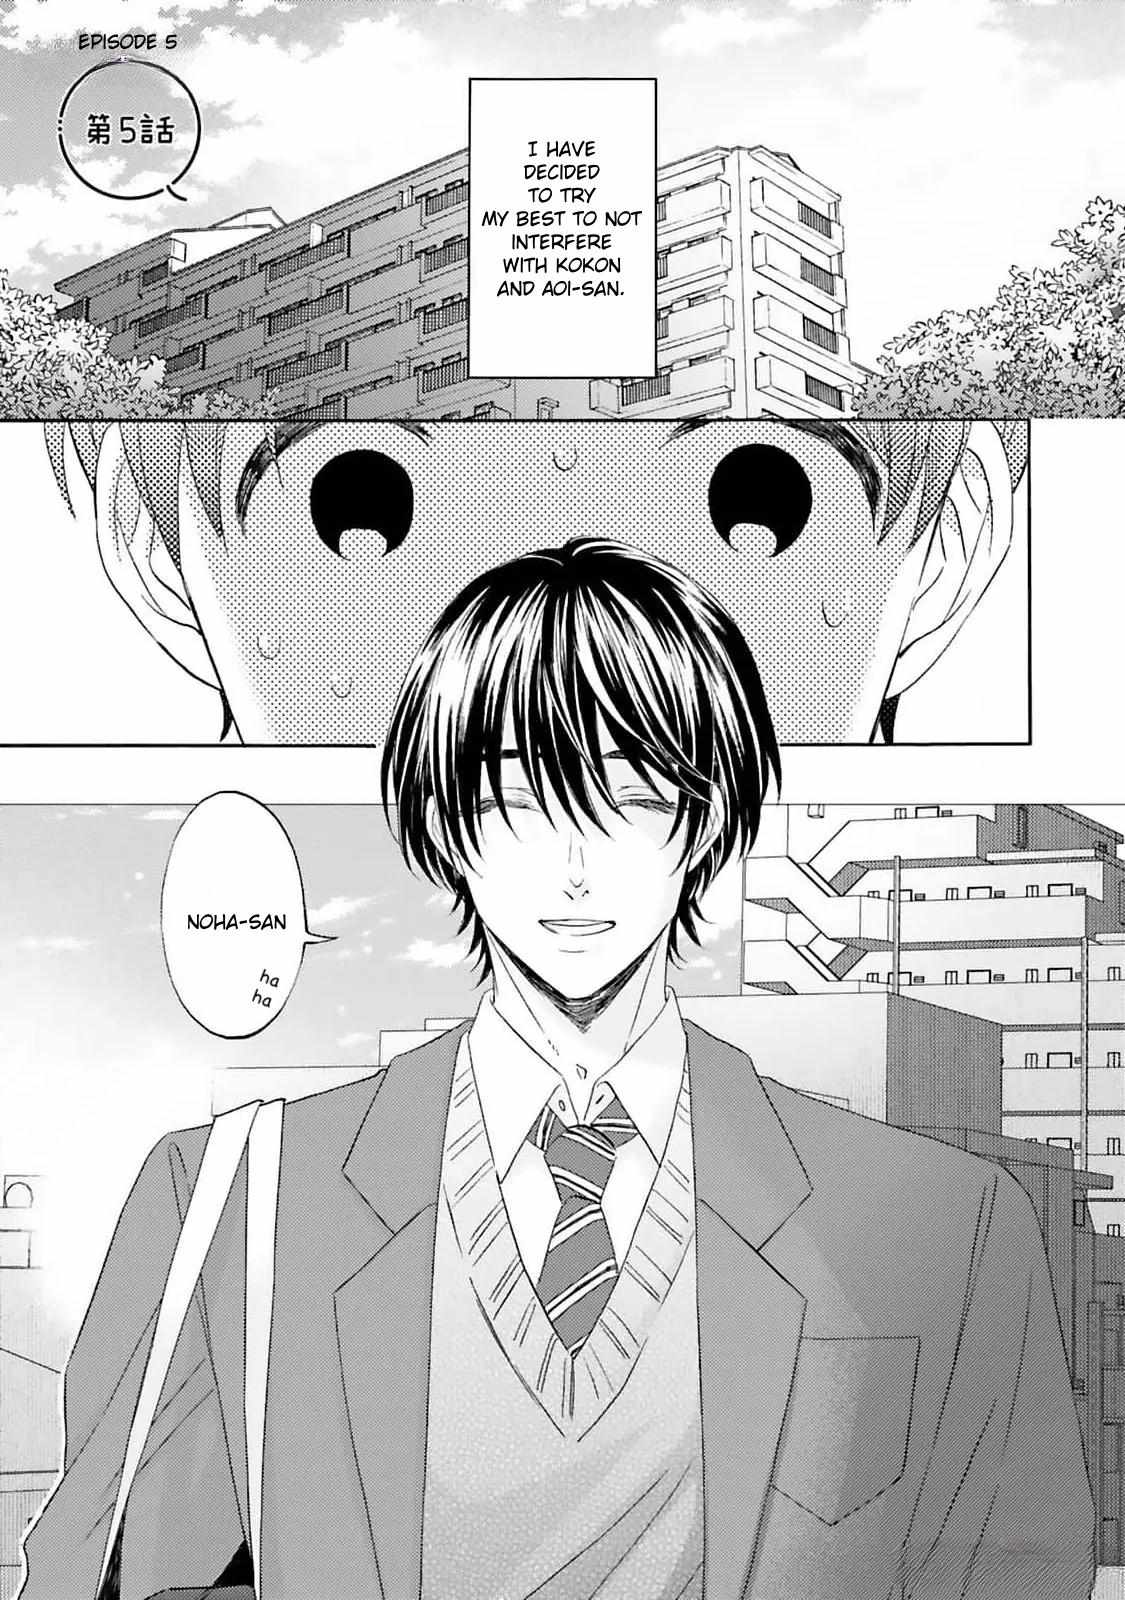 My Cutie Pie -An Ordinary Boy And His Gorgeous Childhood Friend- 〘Official〙 - 5 page 5-b16a5339